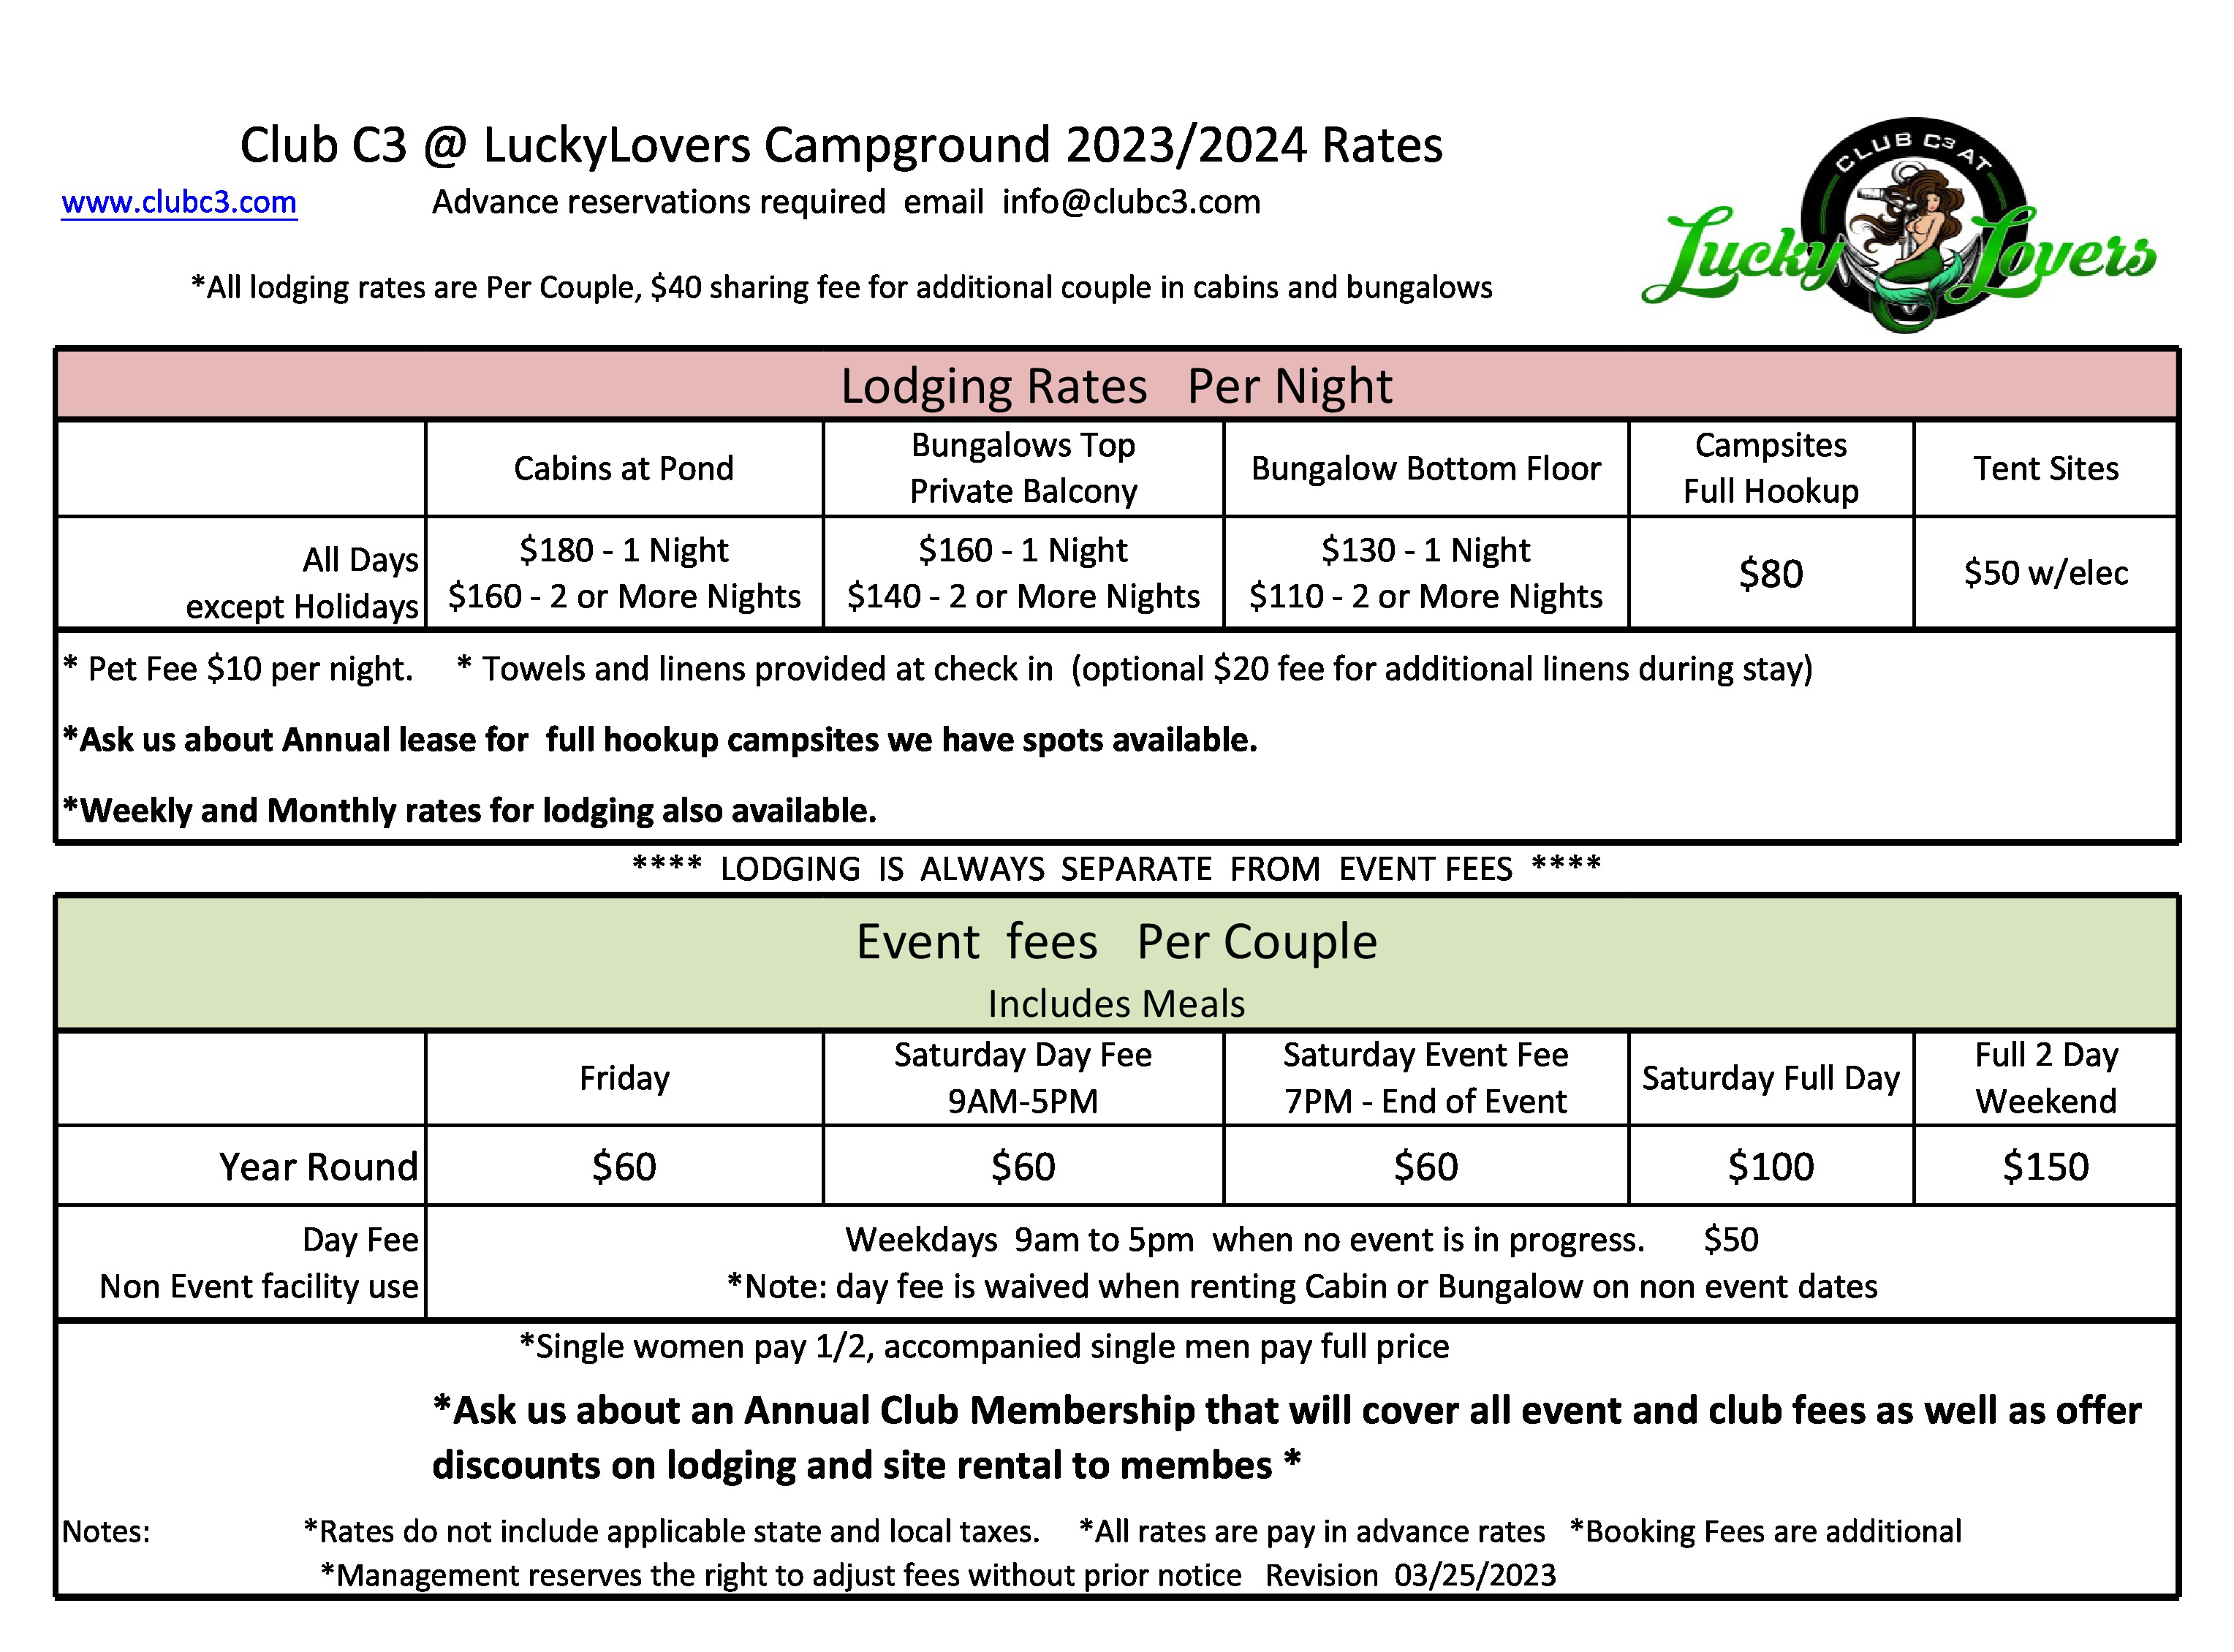 2020 Campground Rates